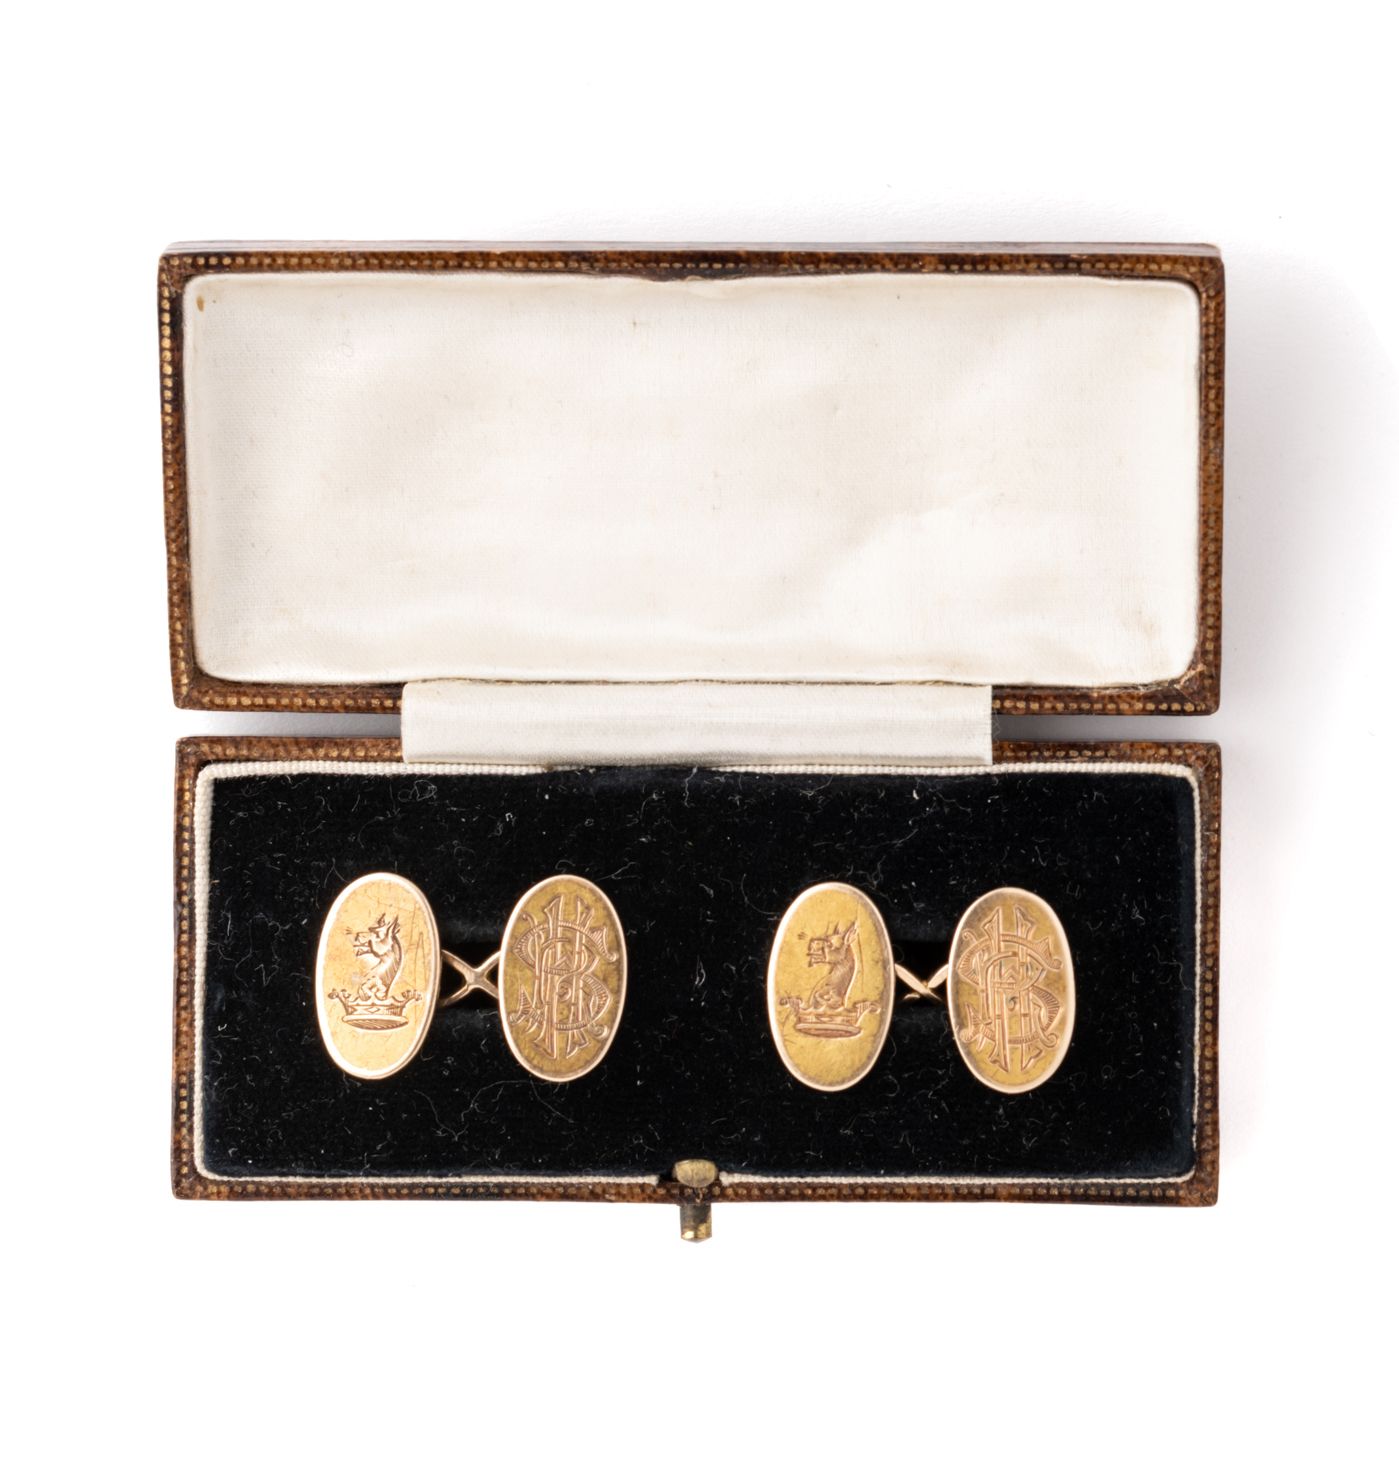 PAIR OF GOLD OVAL CUFFLINKS PAIR OF GOLD OVAL CUFFLINKS each double sided link e&hellip;